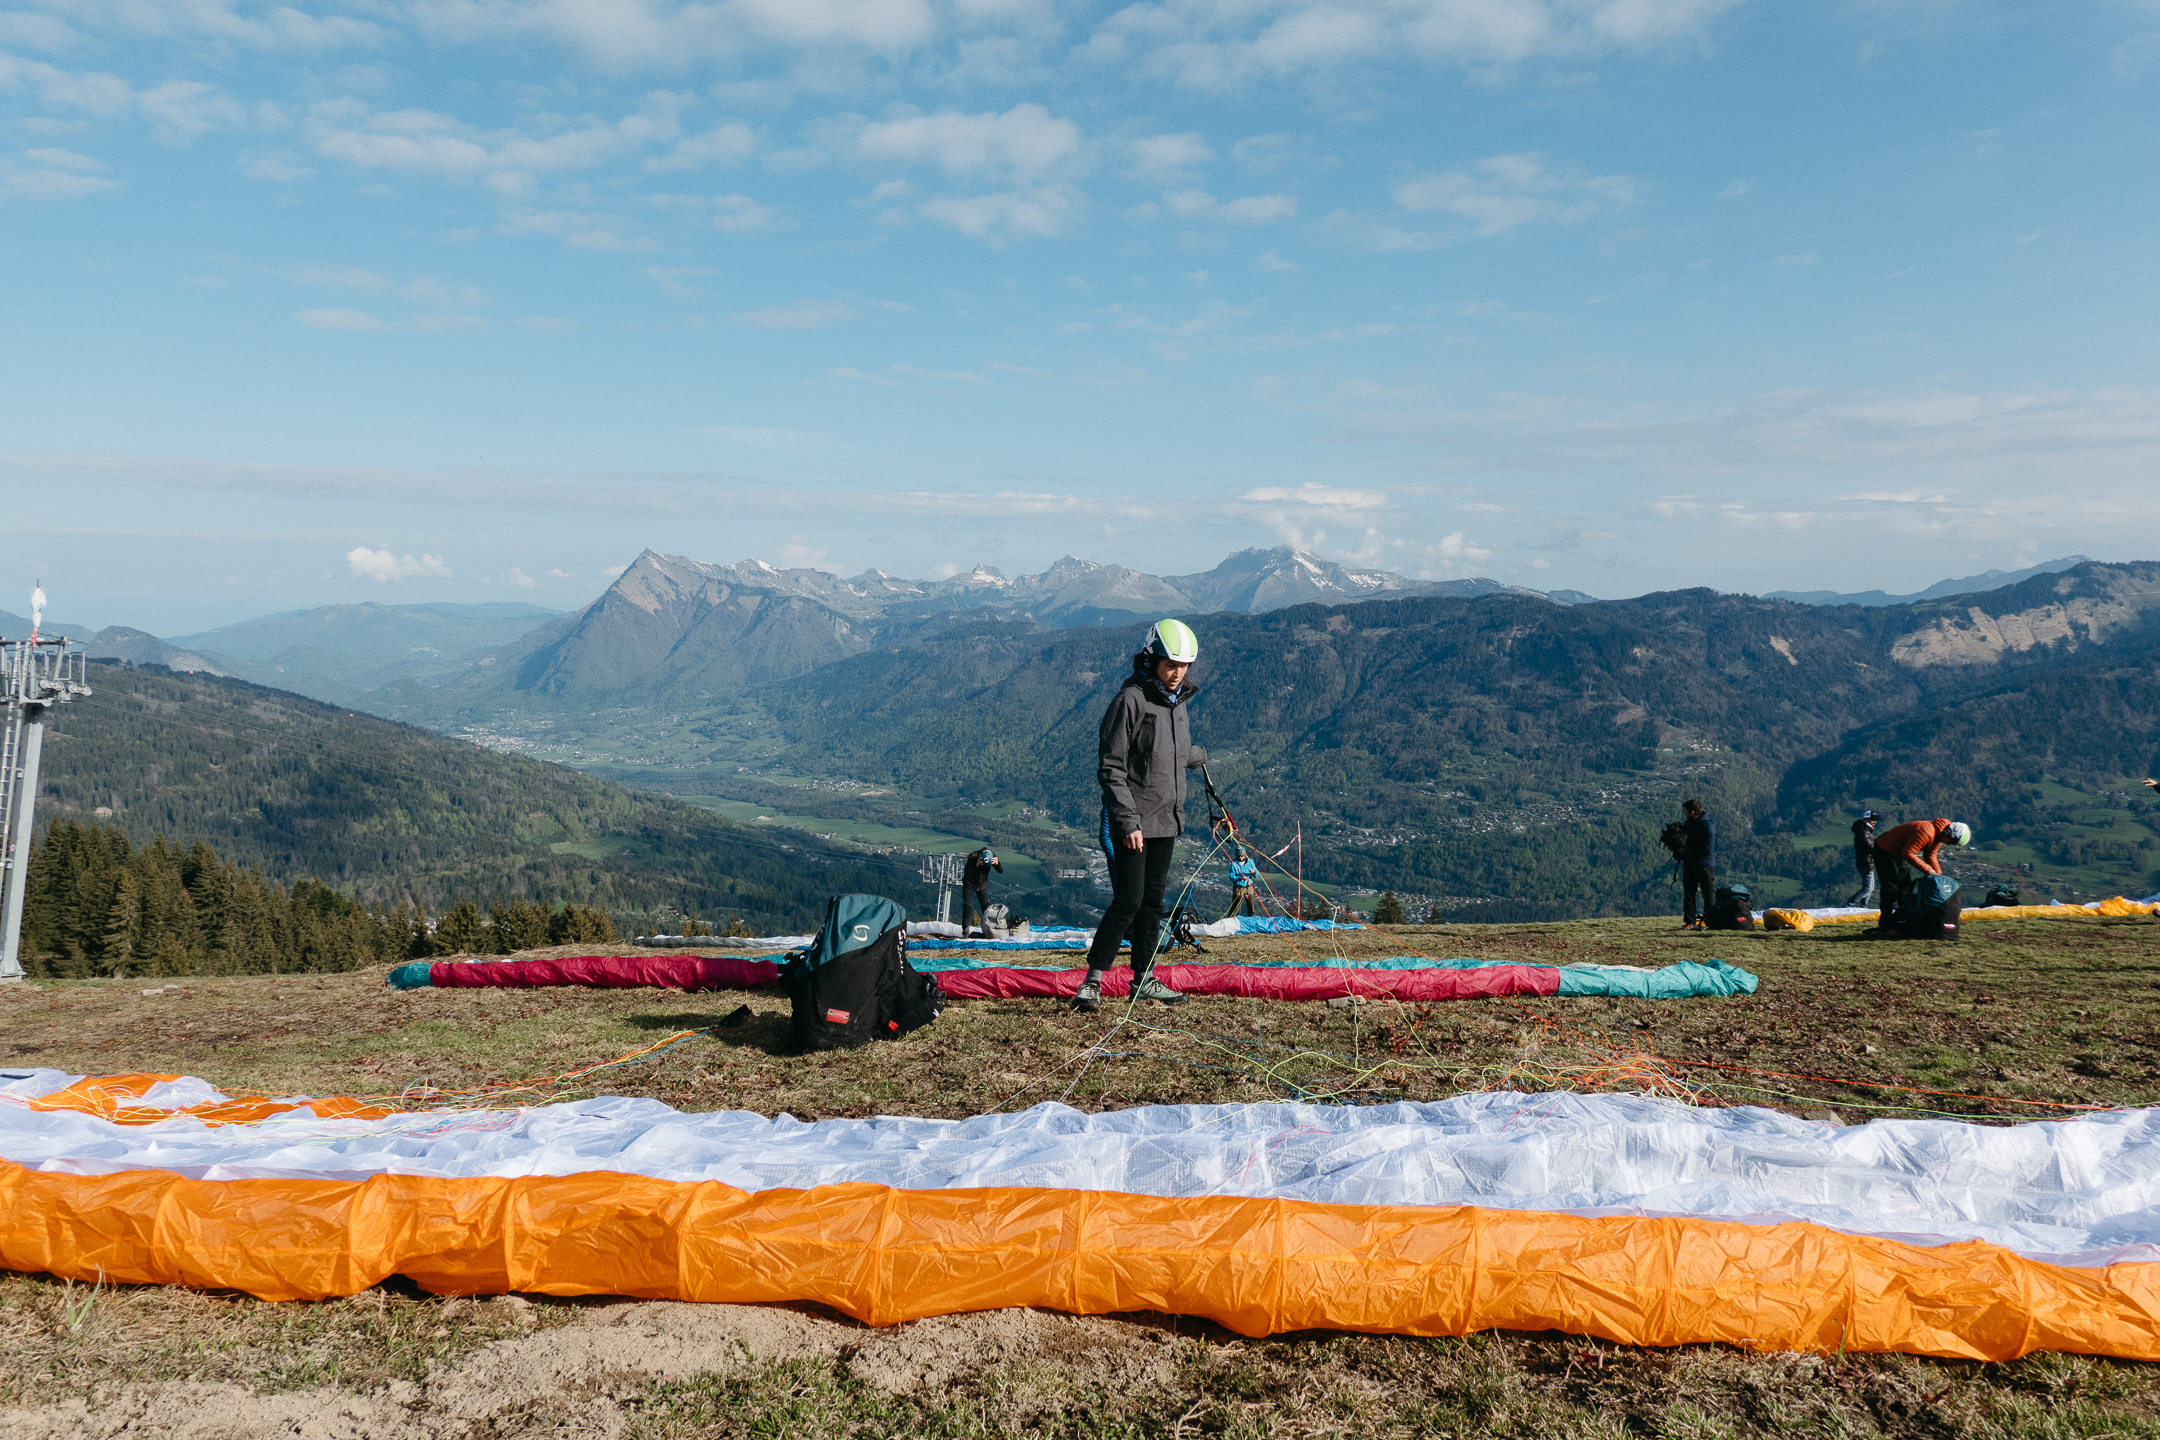 Thermal paragliding course